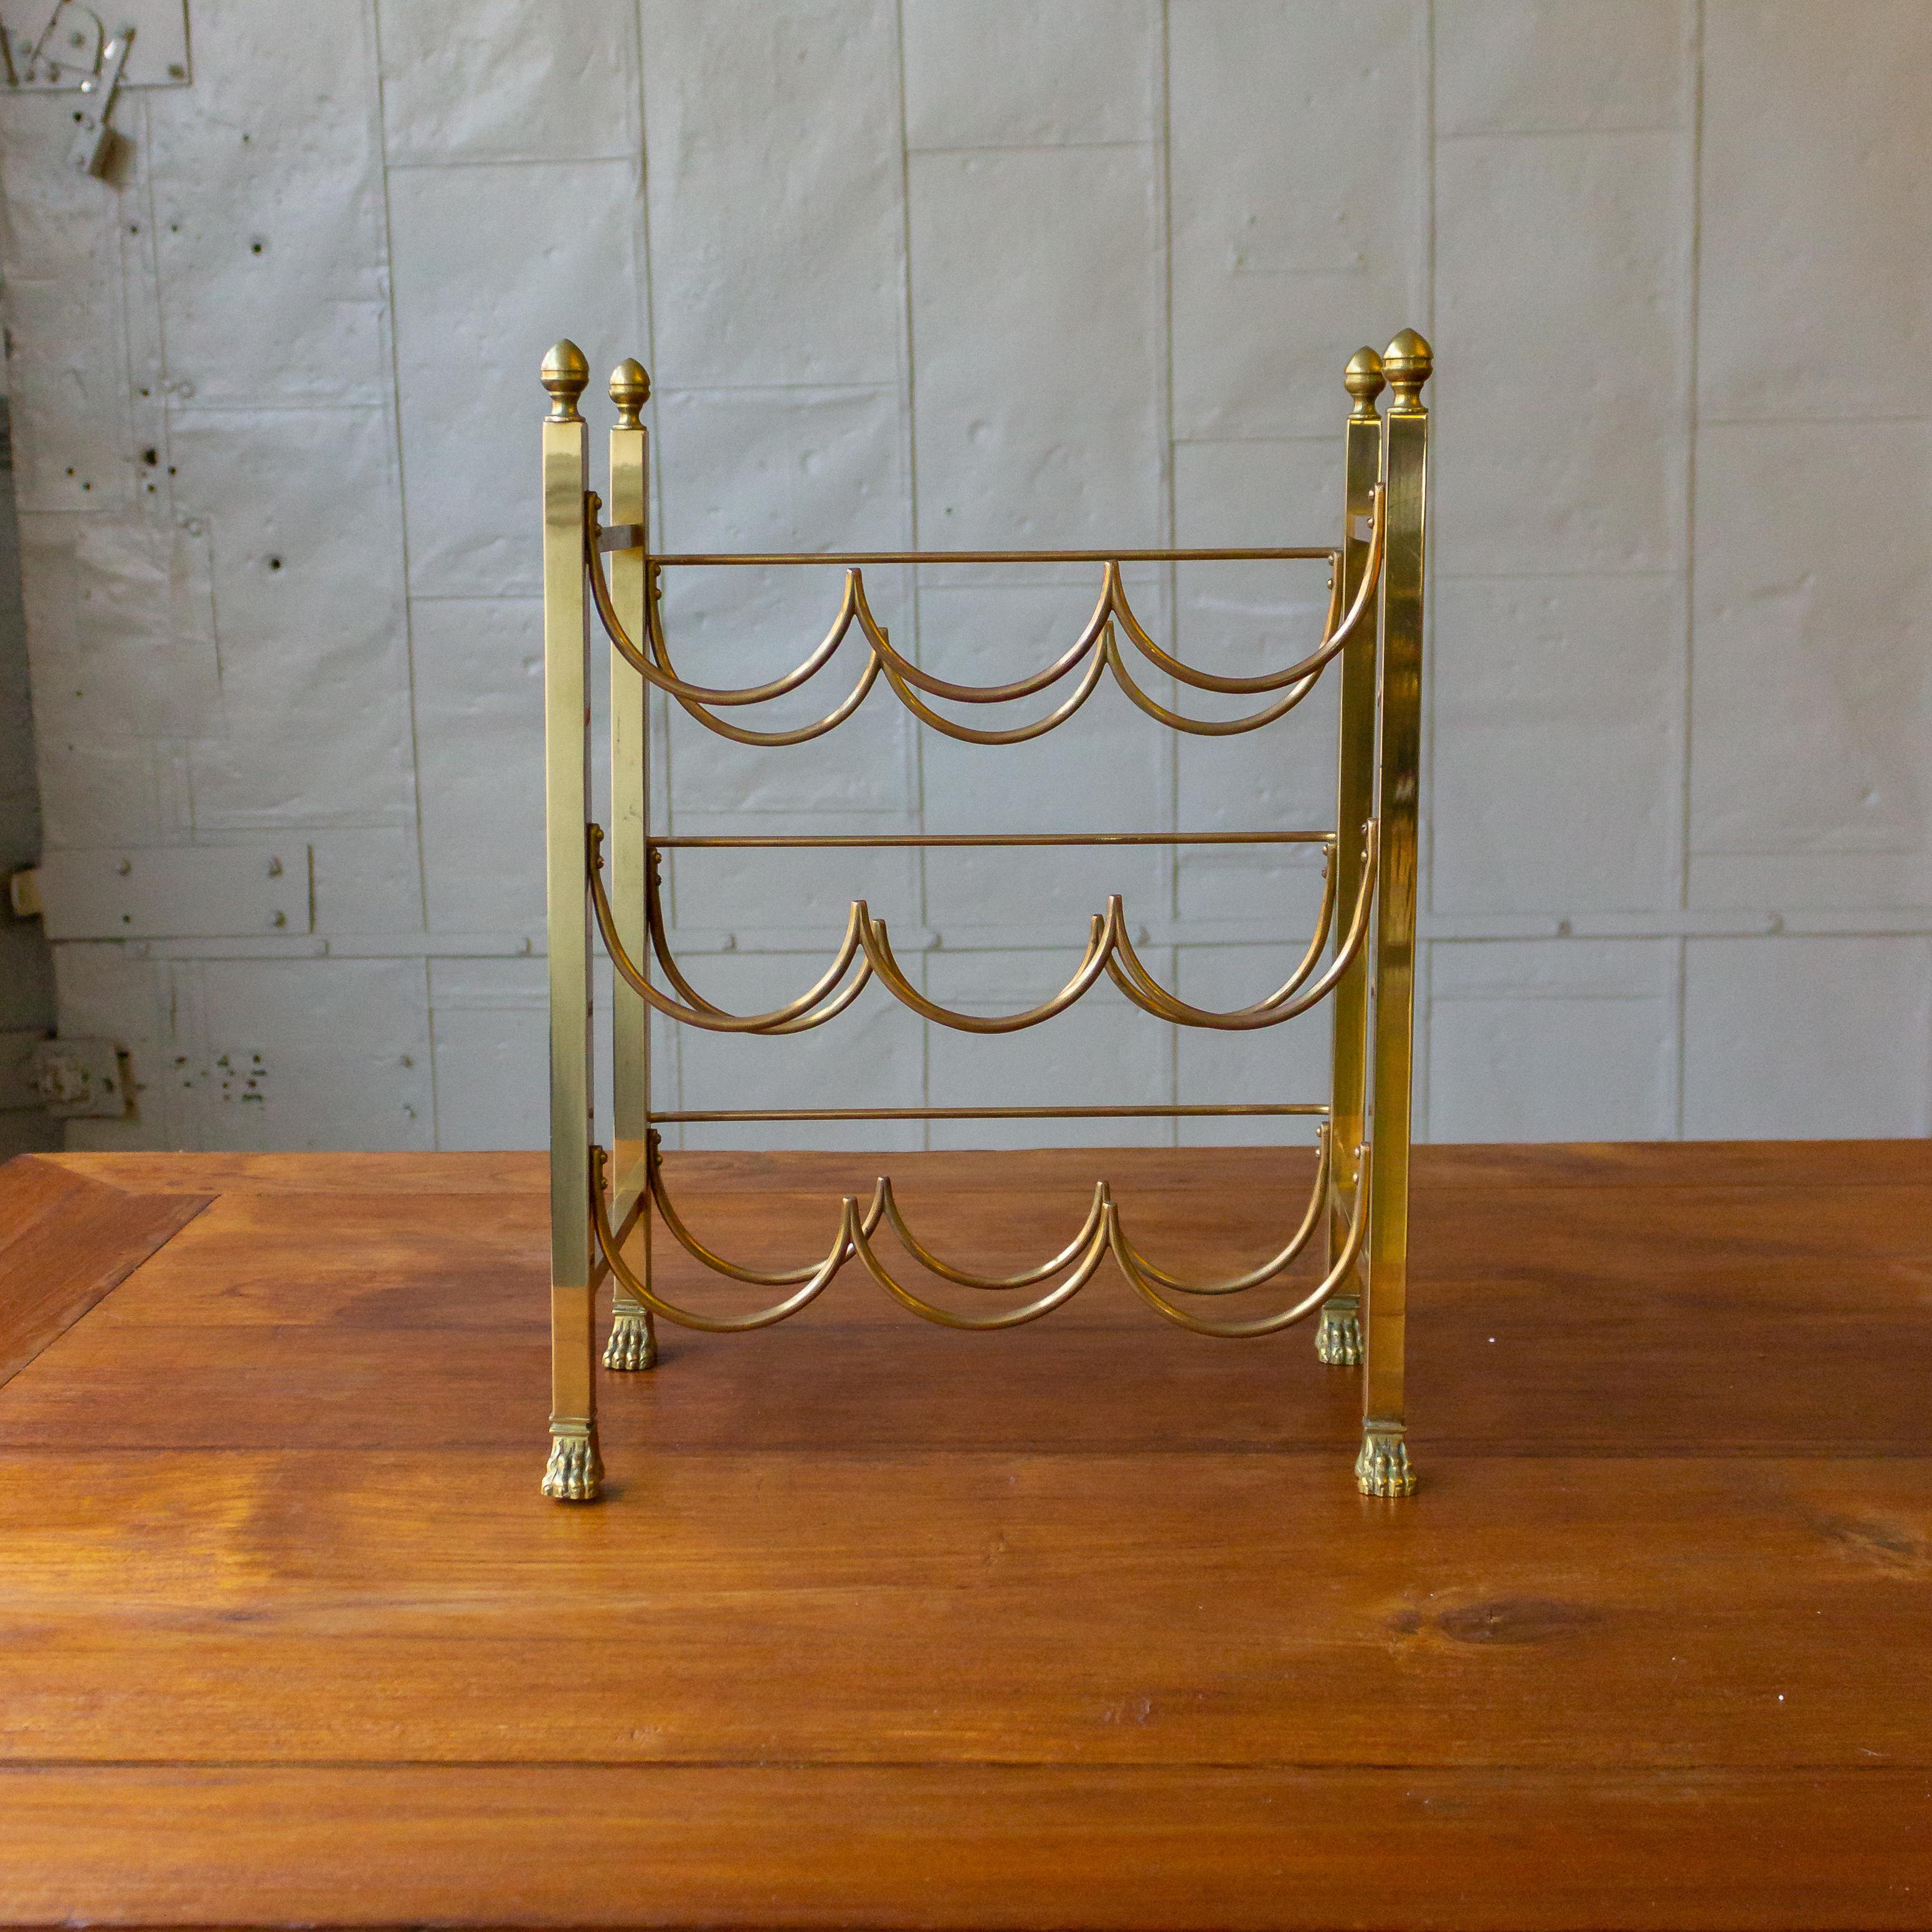 French three-tier polished brass wine rack with claw feet and acorn shaped finials.